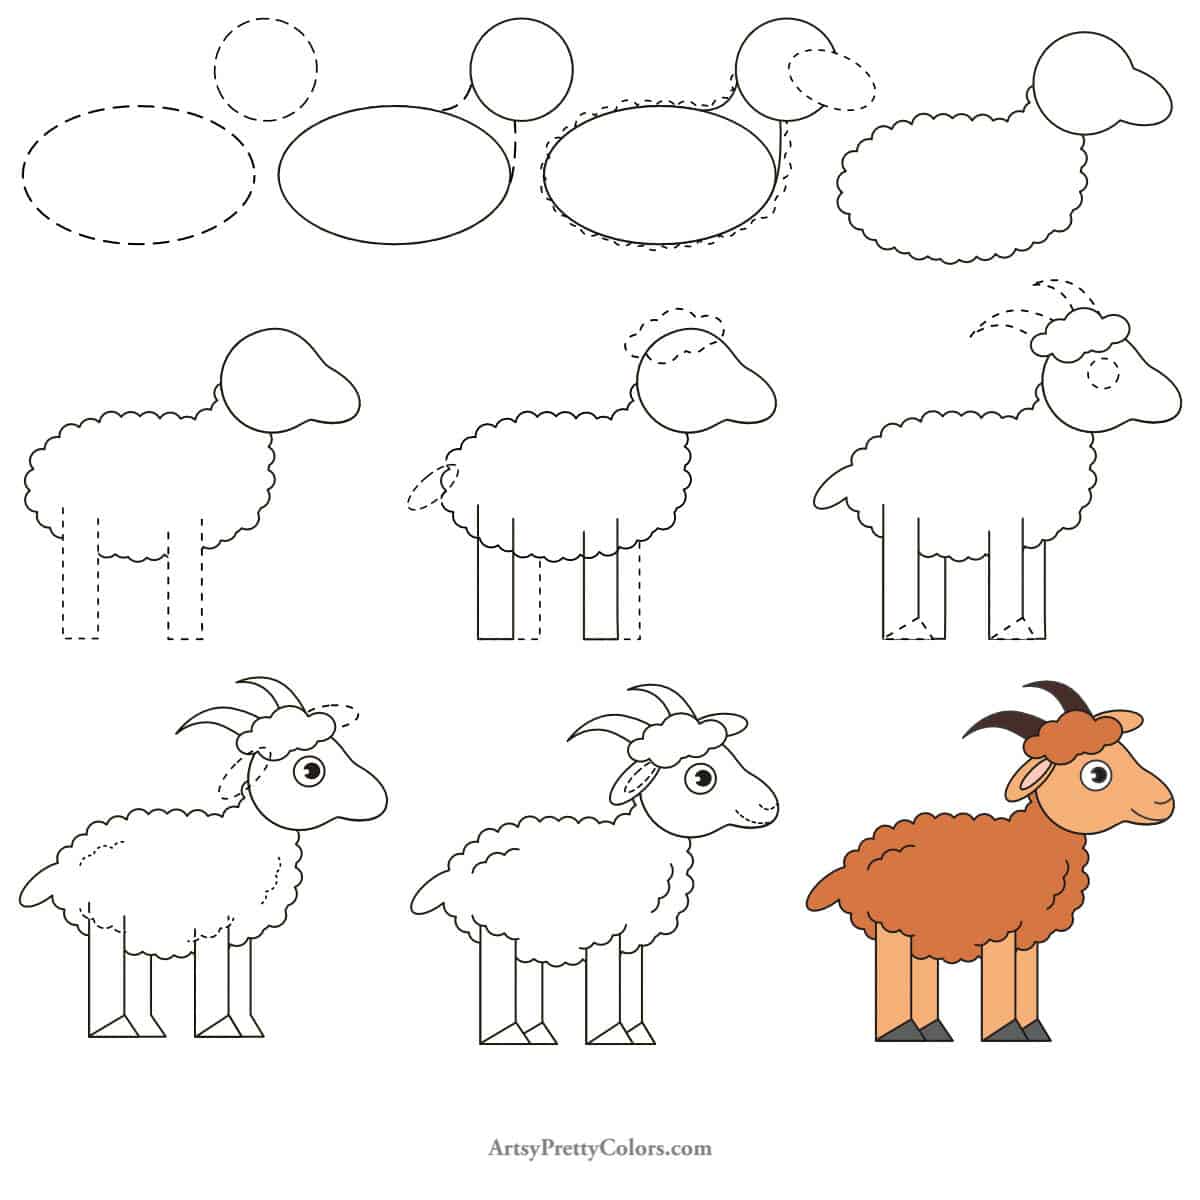 each step in goat drawing process with dotted lines showing the step to be drawn